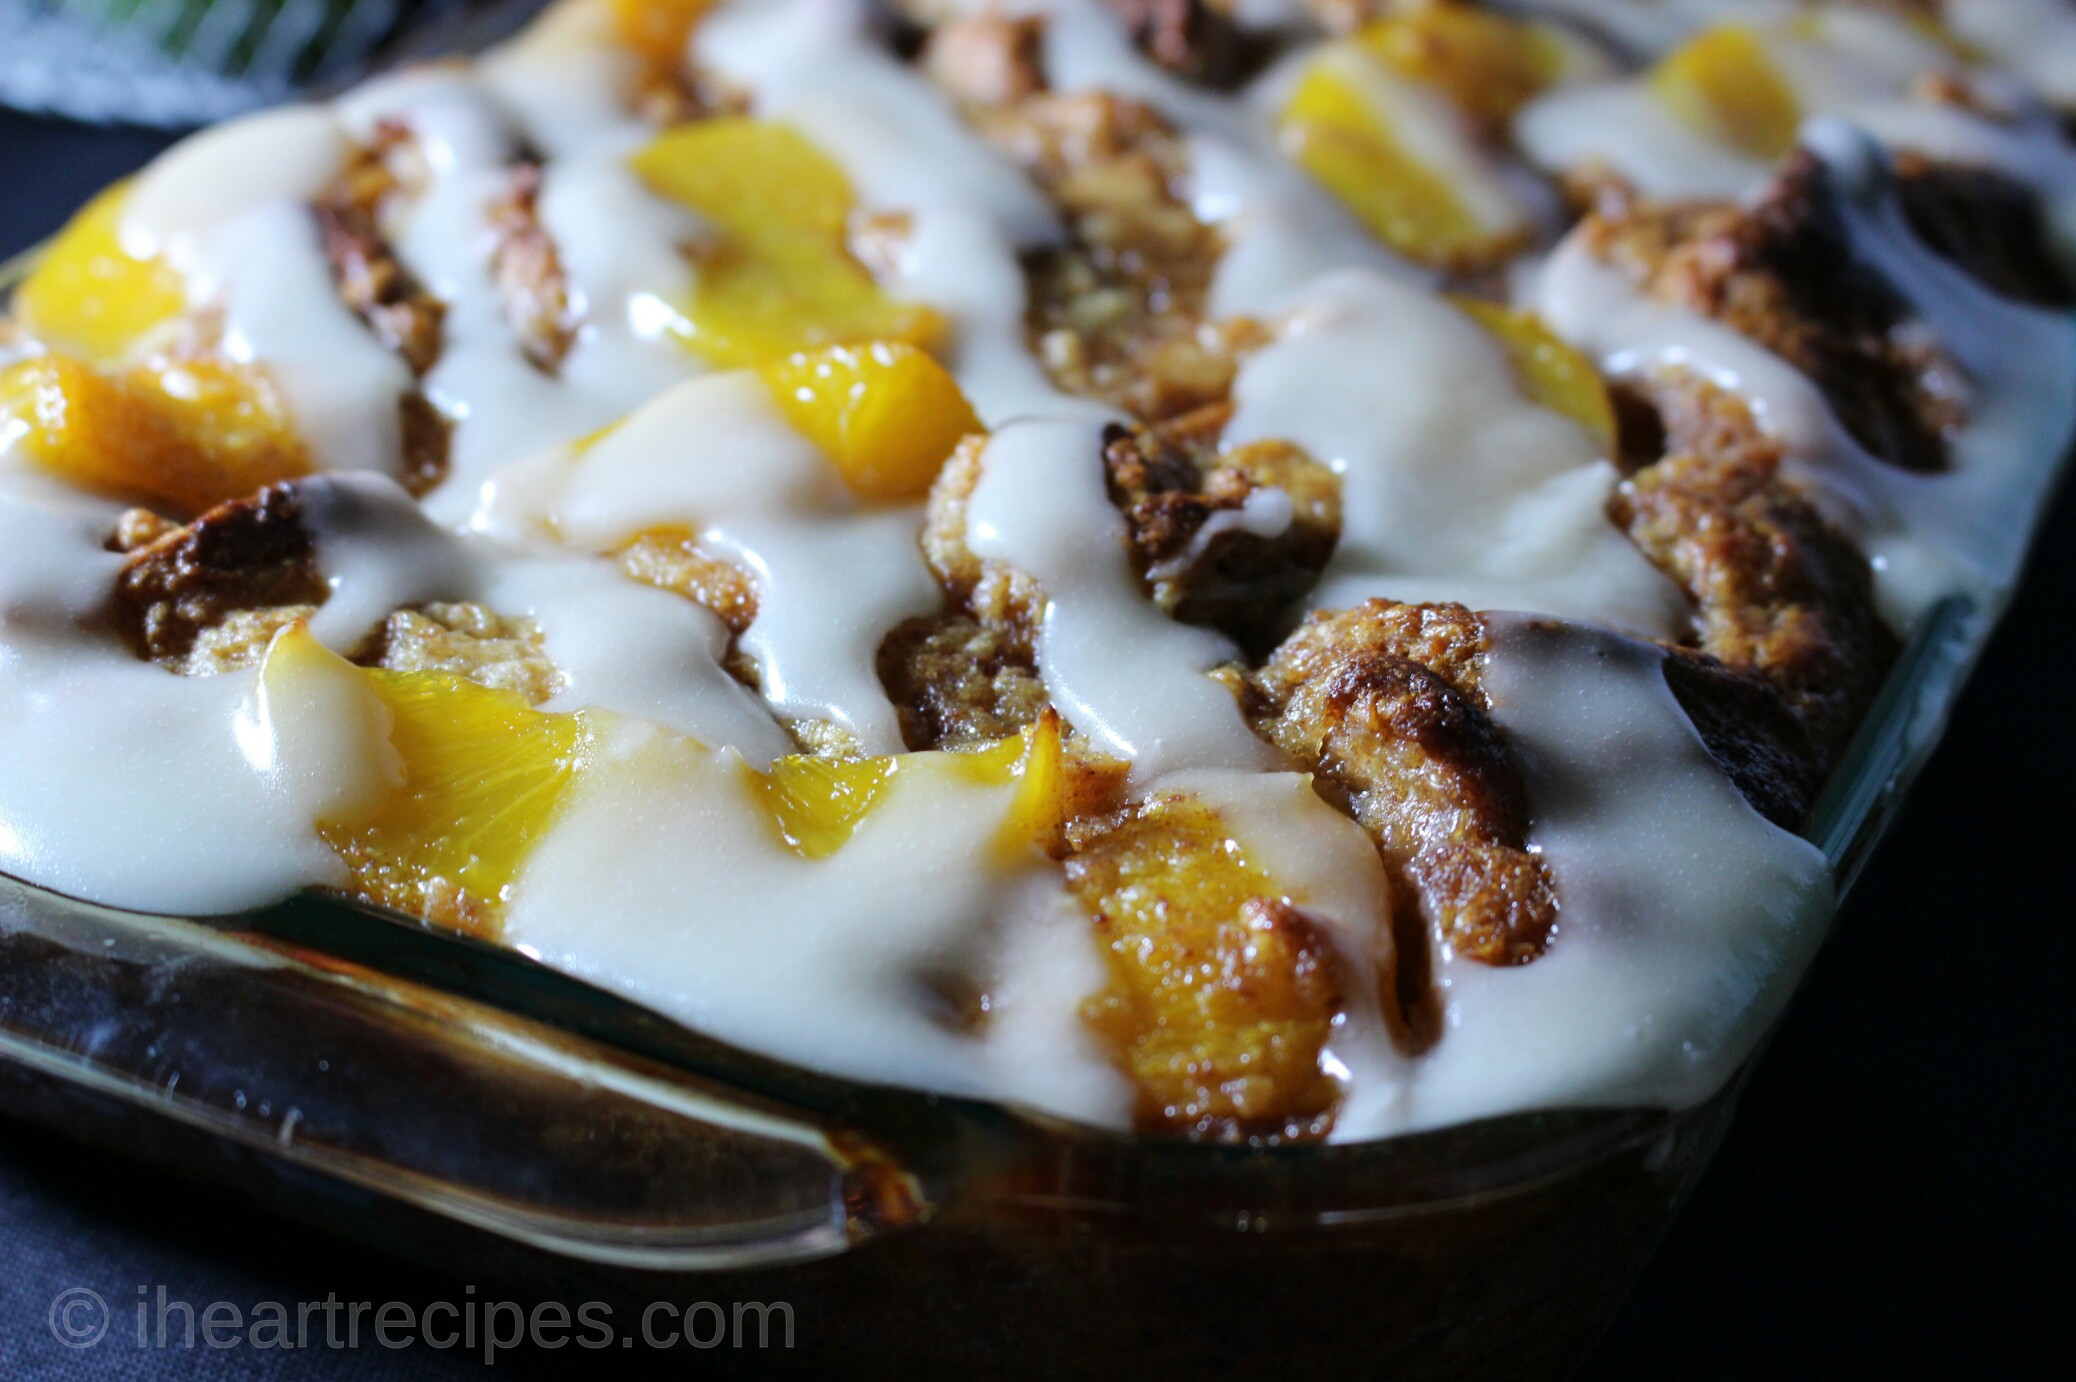 A closeup image of a baking dish of peach cobbler bread pudding. The freshly baked dessert is topped with peach slices and a sweet vanilla icing.